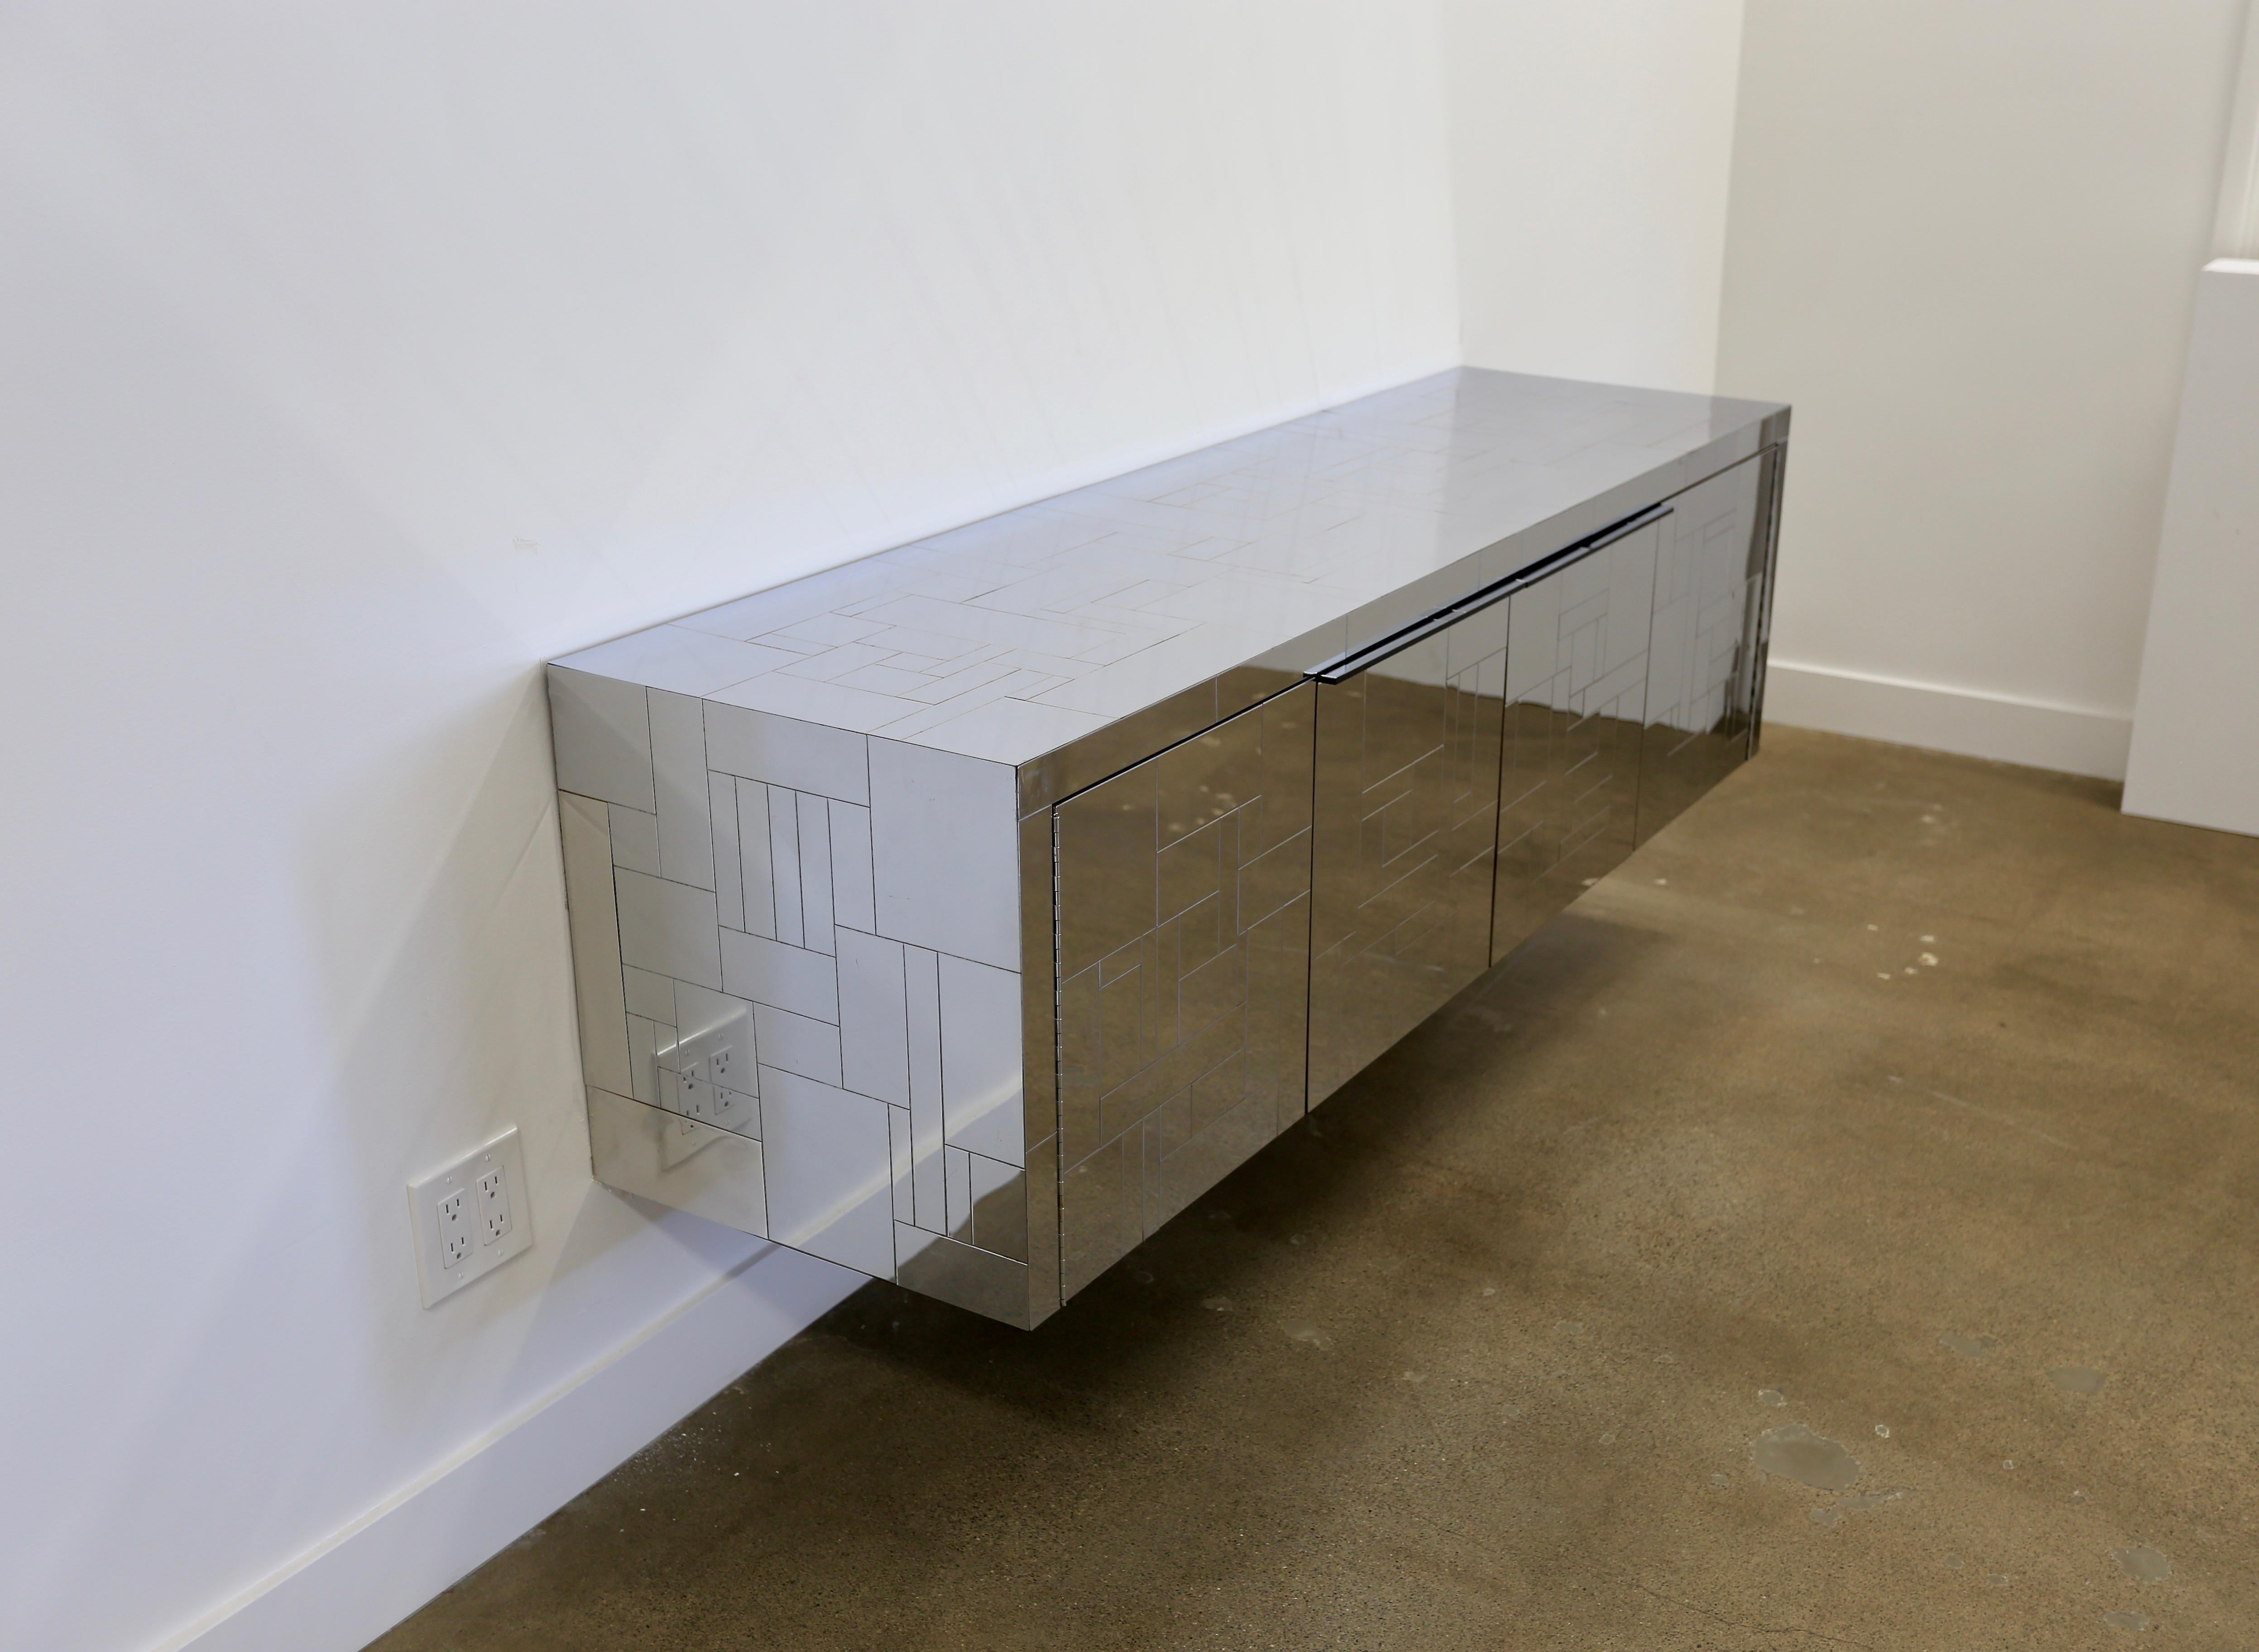 Paul Evans wall-mounted Cityscape cabinet. Manufactured by Paul Evans Studio for Directional, circa 1975. This piece is signed. The chrome-plated steel cityscape detail continues on the bottom of the credenza.